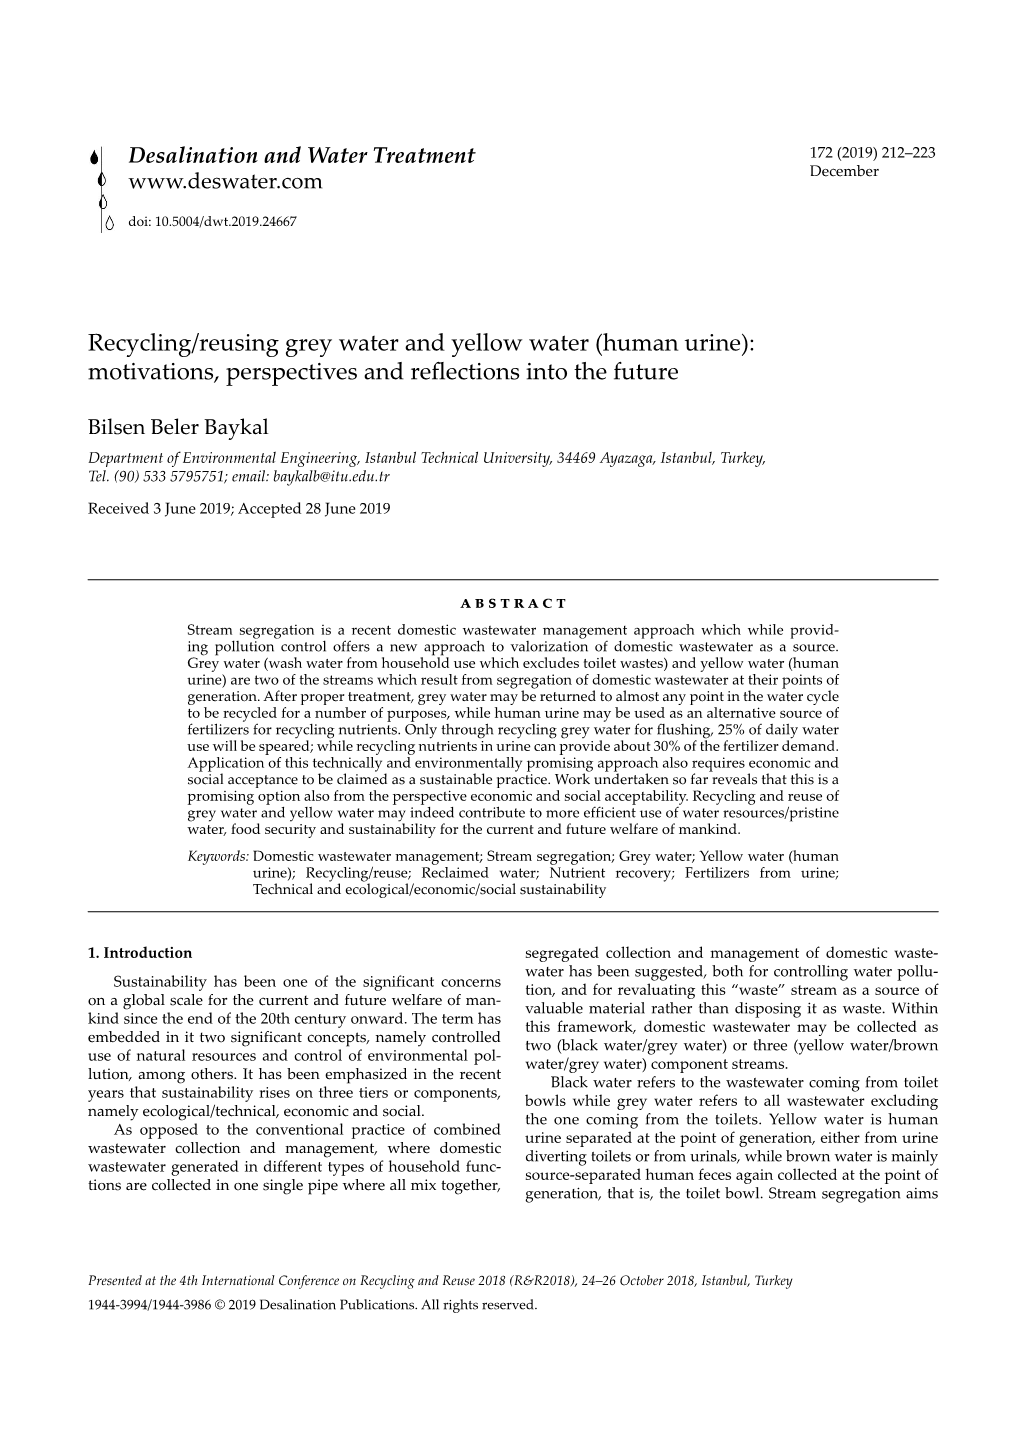 Recycling/Reusing Grey Water and Yellow Water (Human Urine): Motivations, Perspectives and Reflections Into the Future